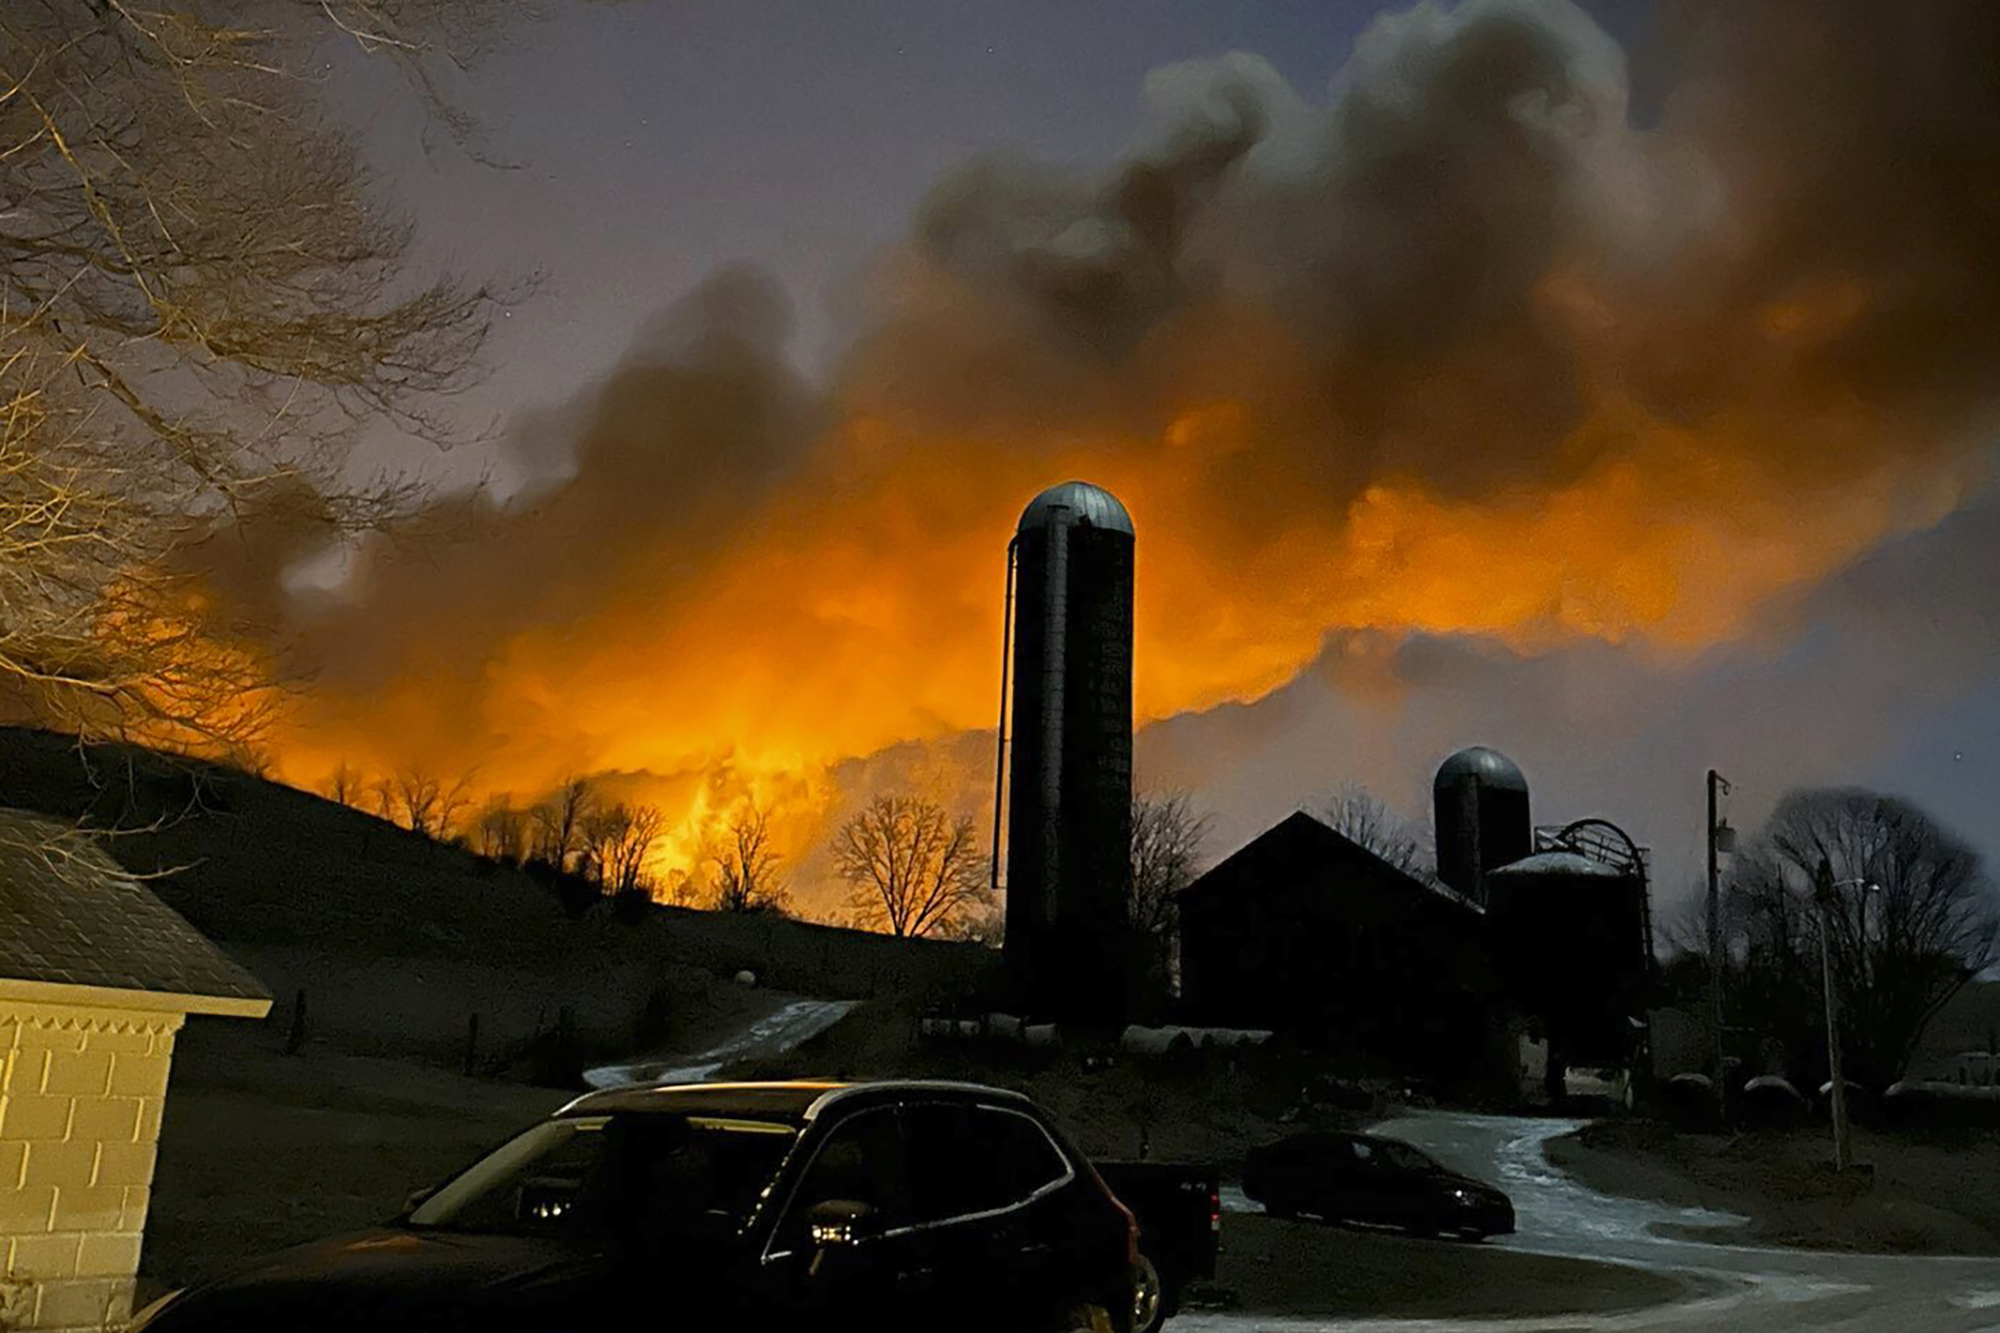 Ohio Families Living in Limbo Months After Fire